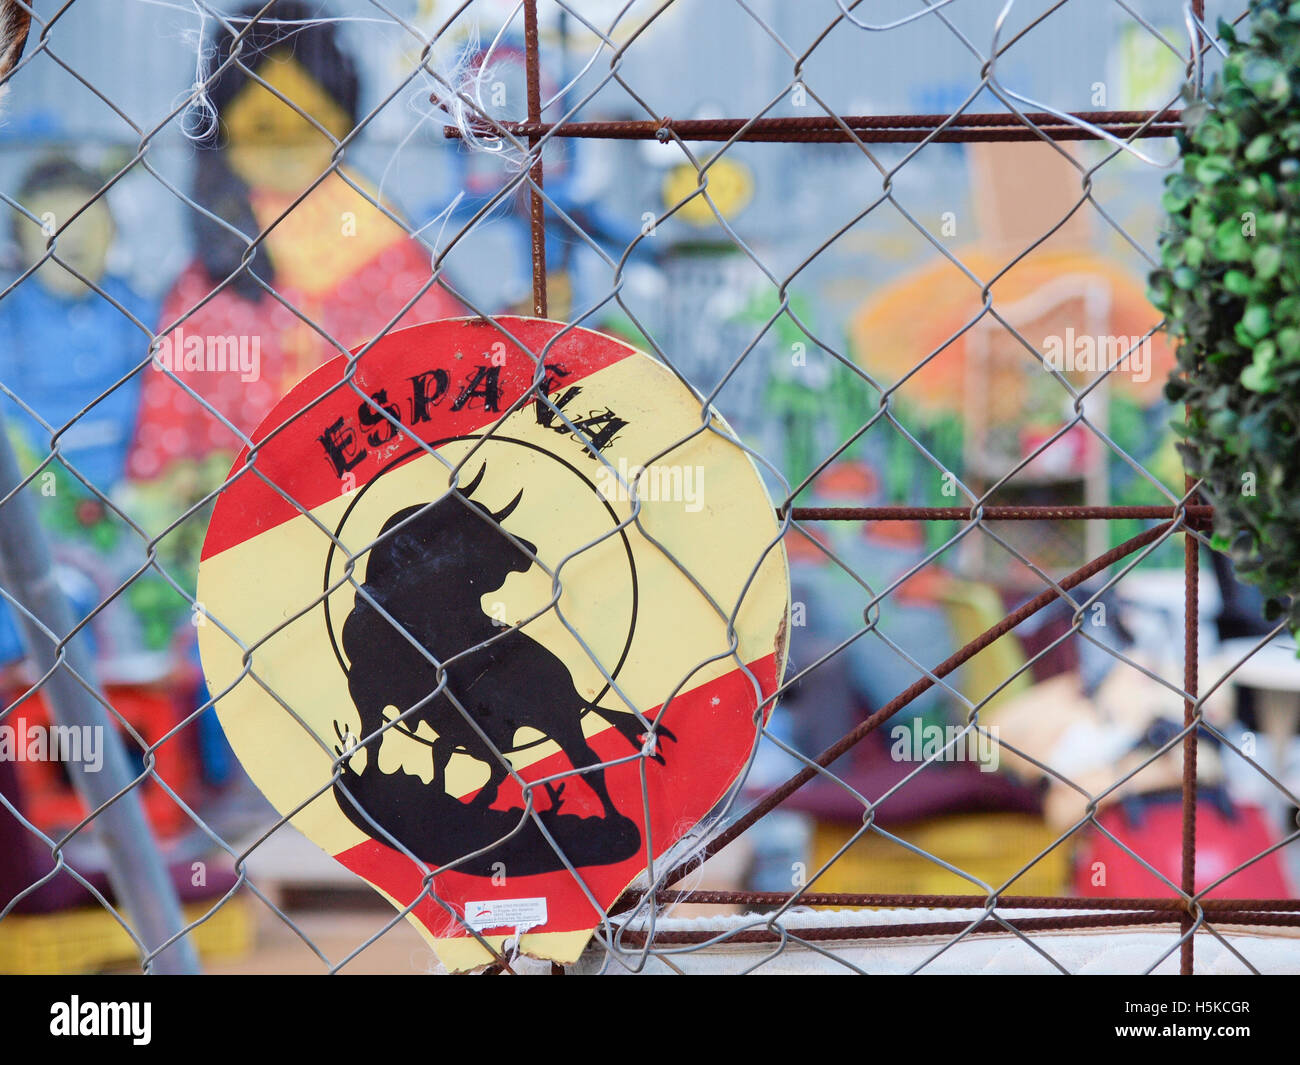 CHAIN LINK FENCE WITH ITEMS HANGING FROM IT BARCELONA SPAIN Stock Photo